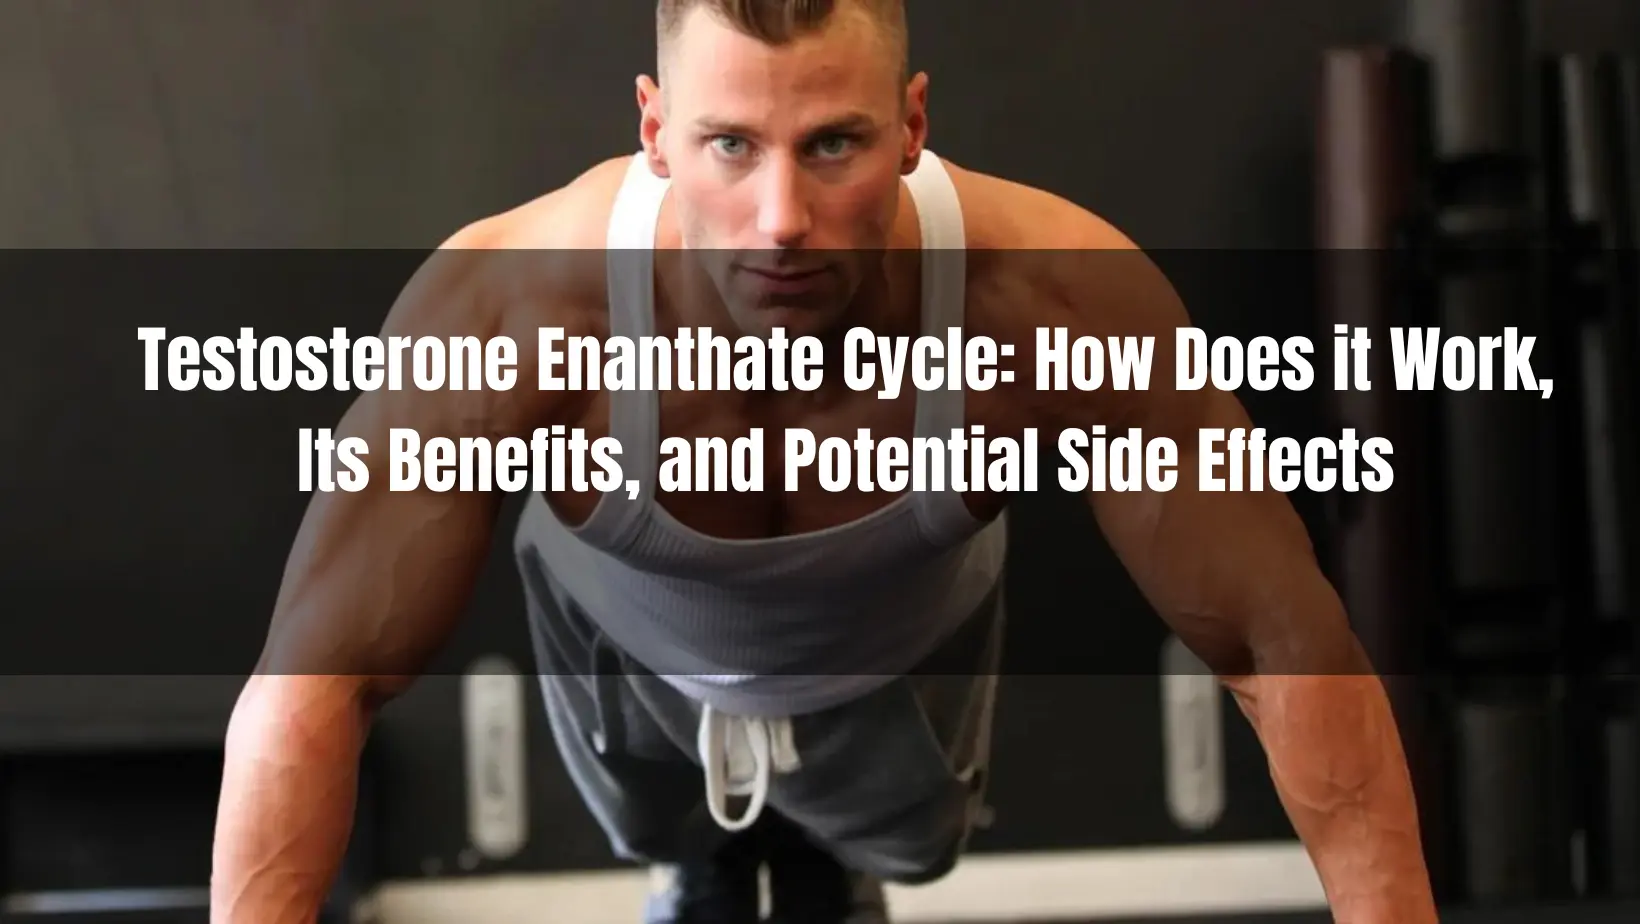 Test E Cycle: Benefits and Potential Side Effects in Bodybuilding – A Comprehensive Guide